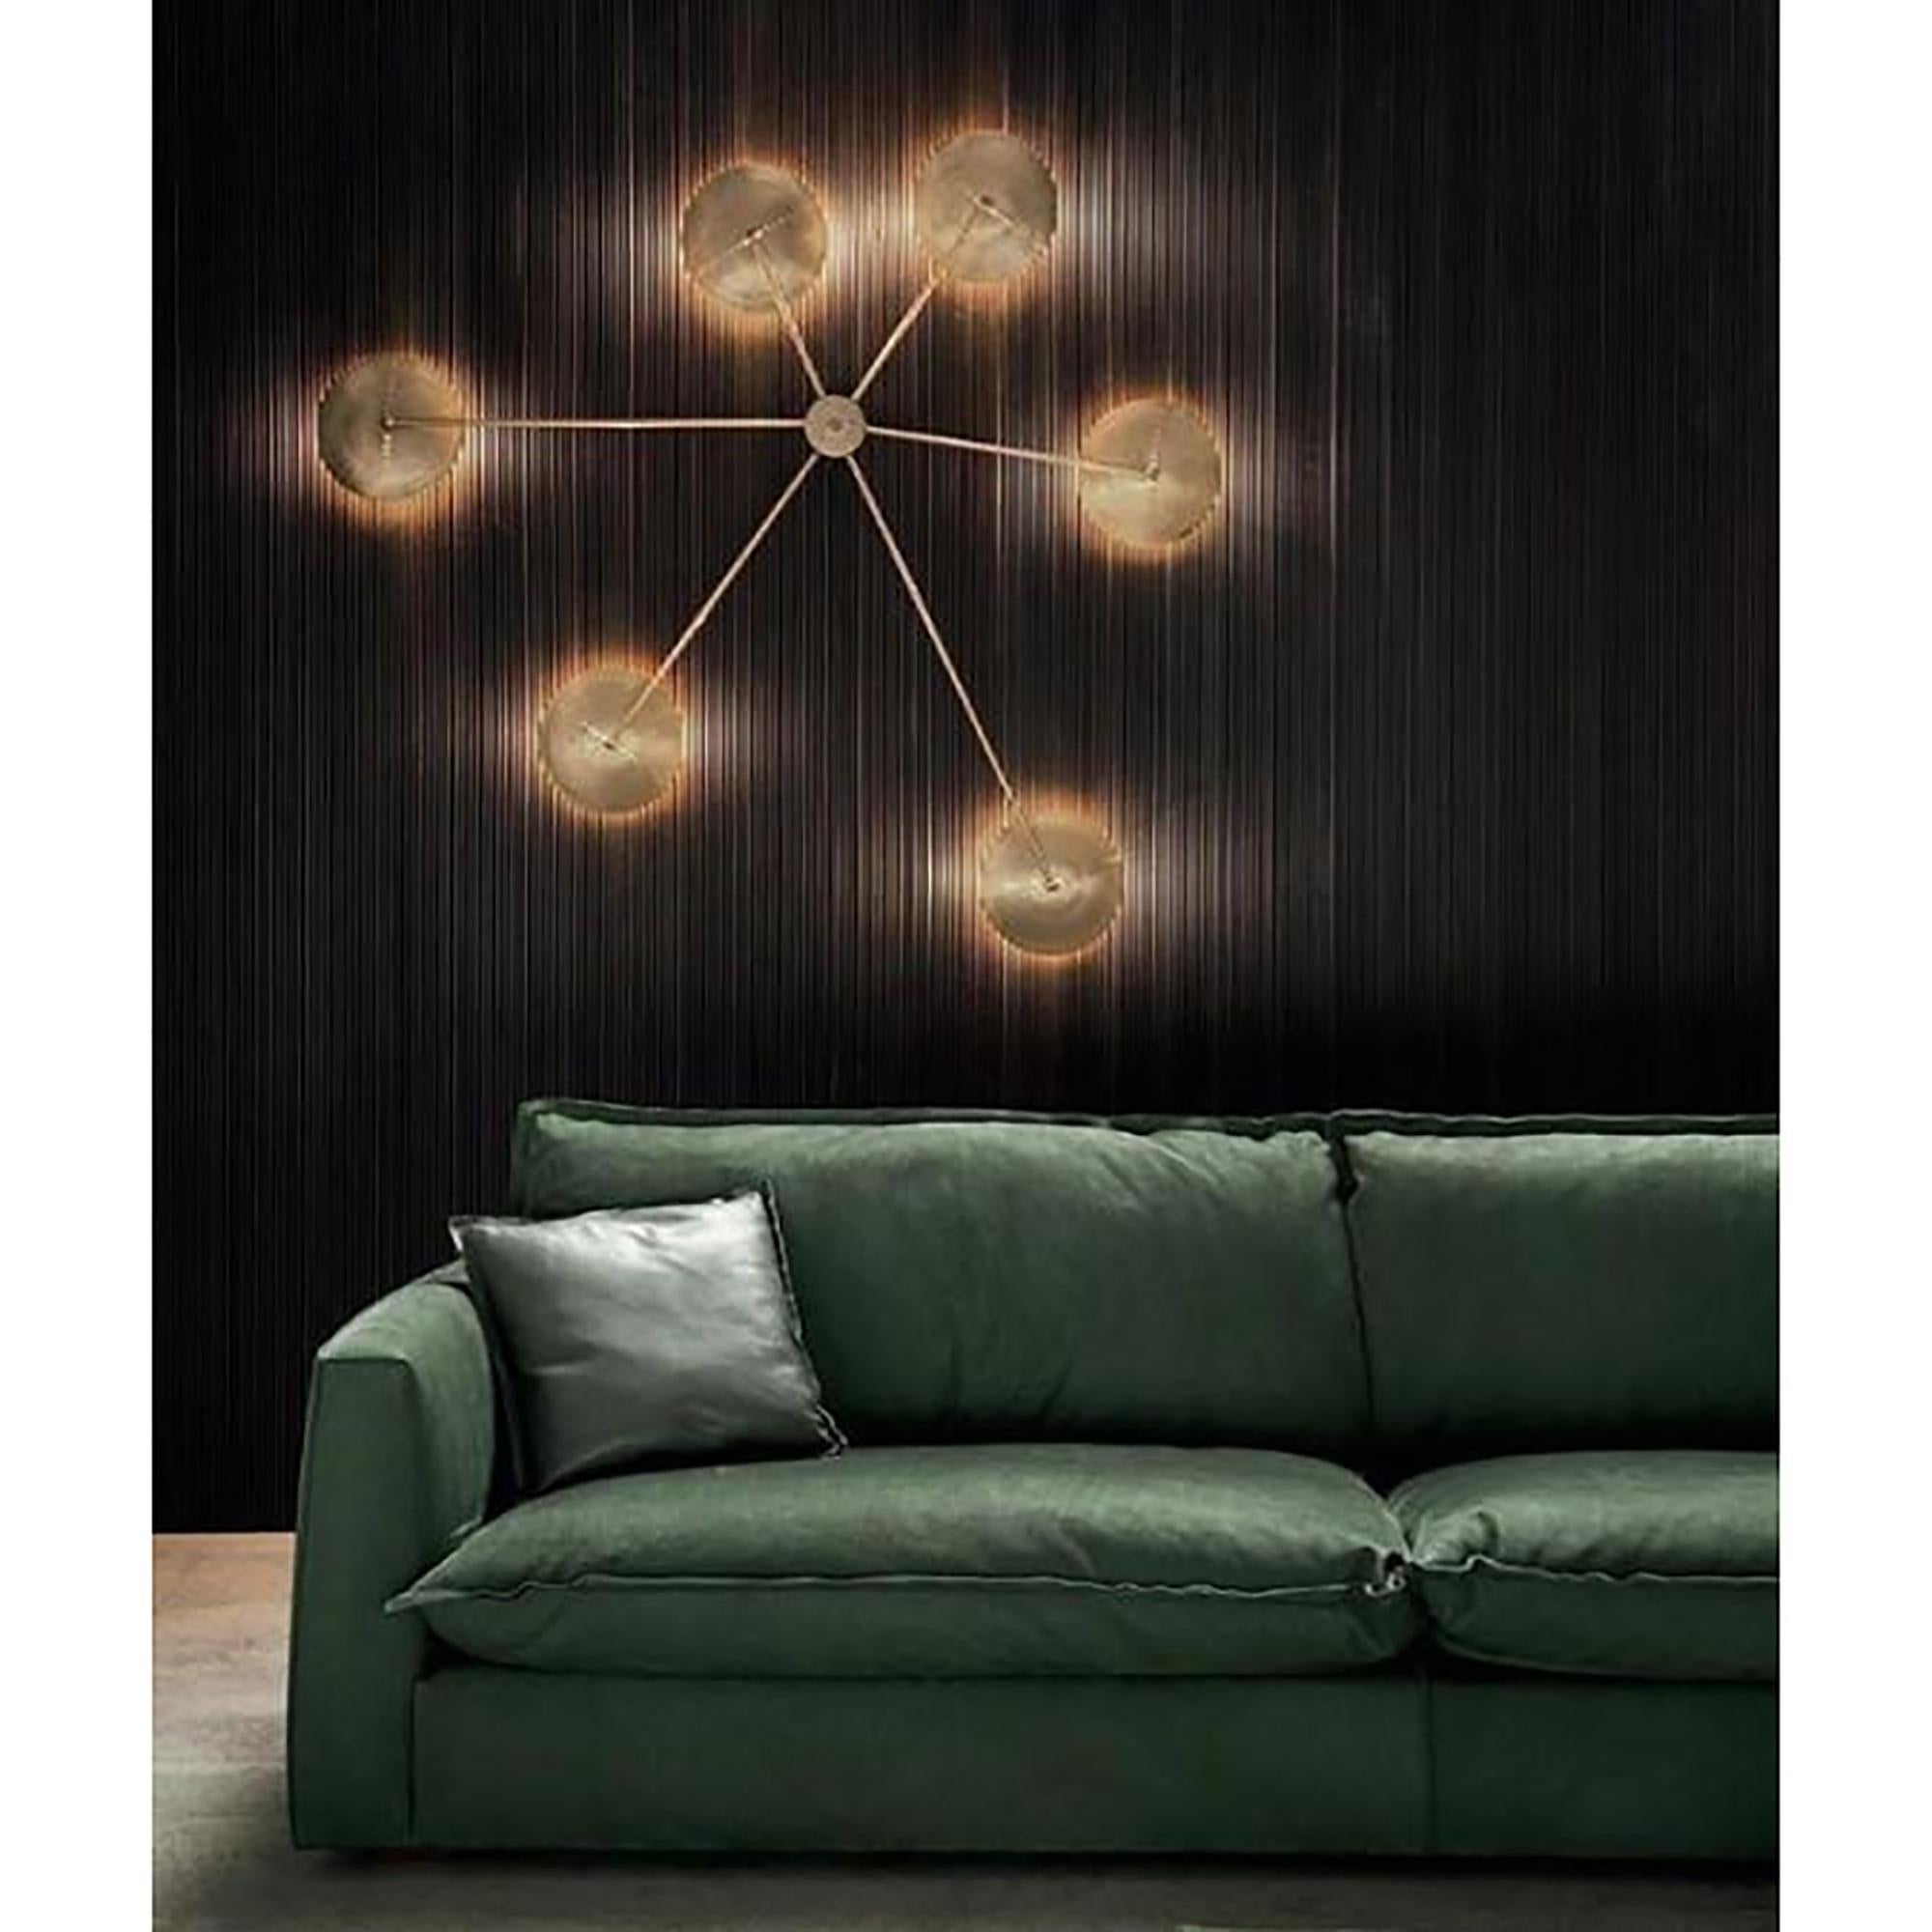 An Italian mid-century design, this wall light will the focus center of your interior. The arms radiate all around the stem, each ending with a brass shade. An attractive vintage architectural ceiling lamp with 6-light. US rewired with E12 sockets